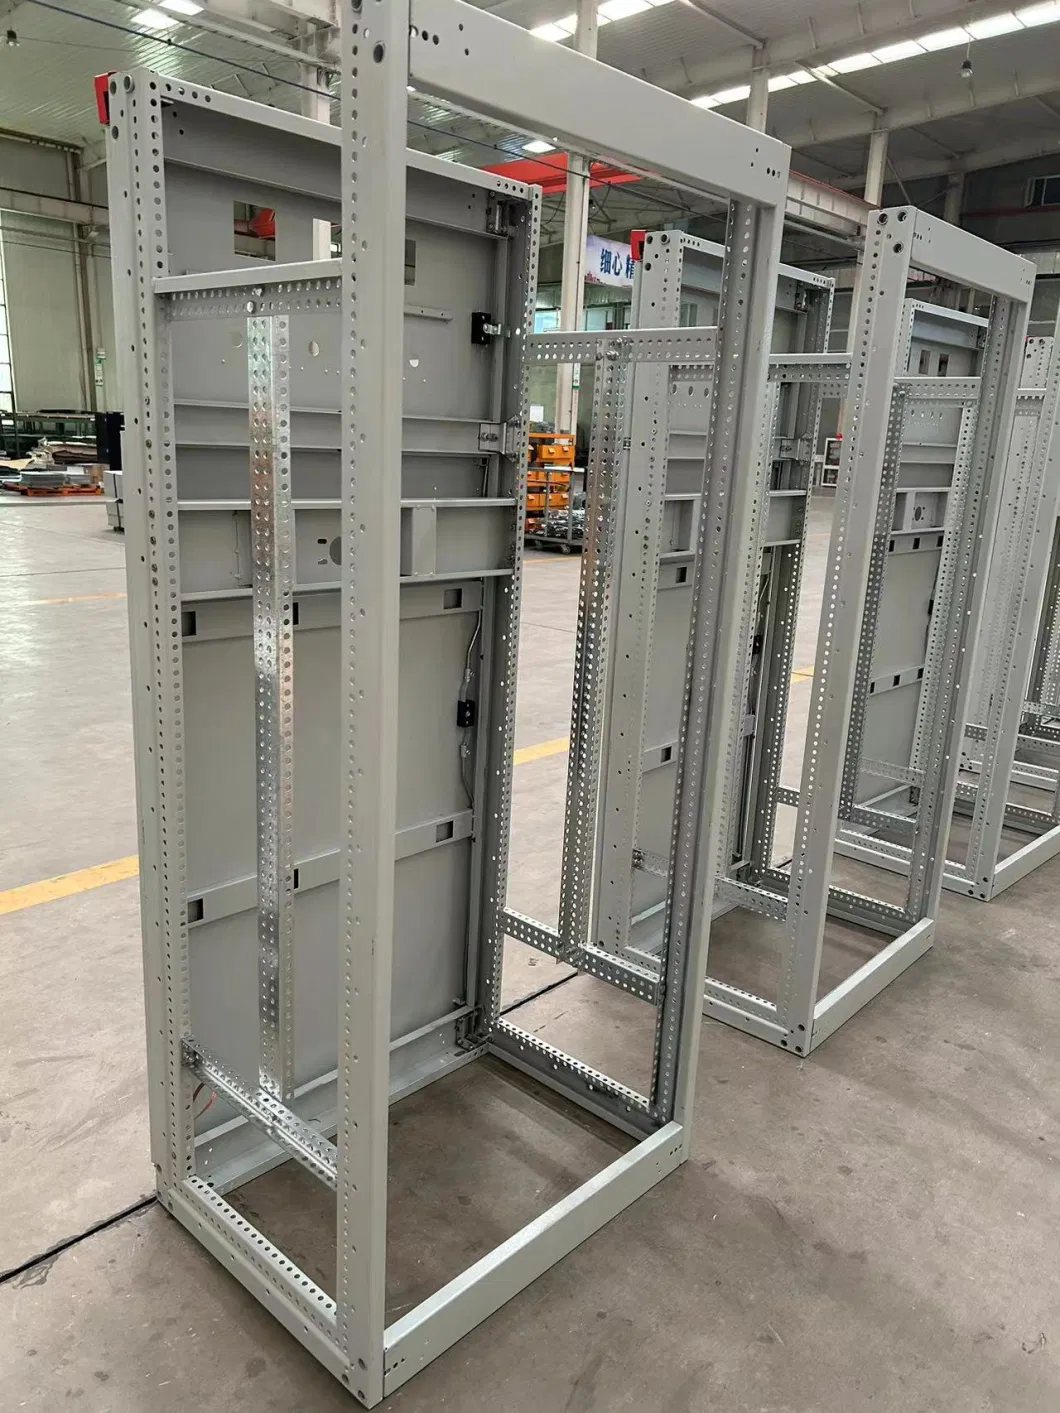 Metal Clad Removable Gas Power Transmission Distribution Equipment Switchgear with Low Voltage